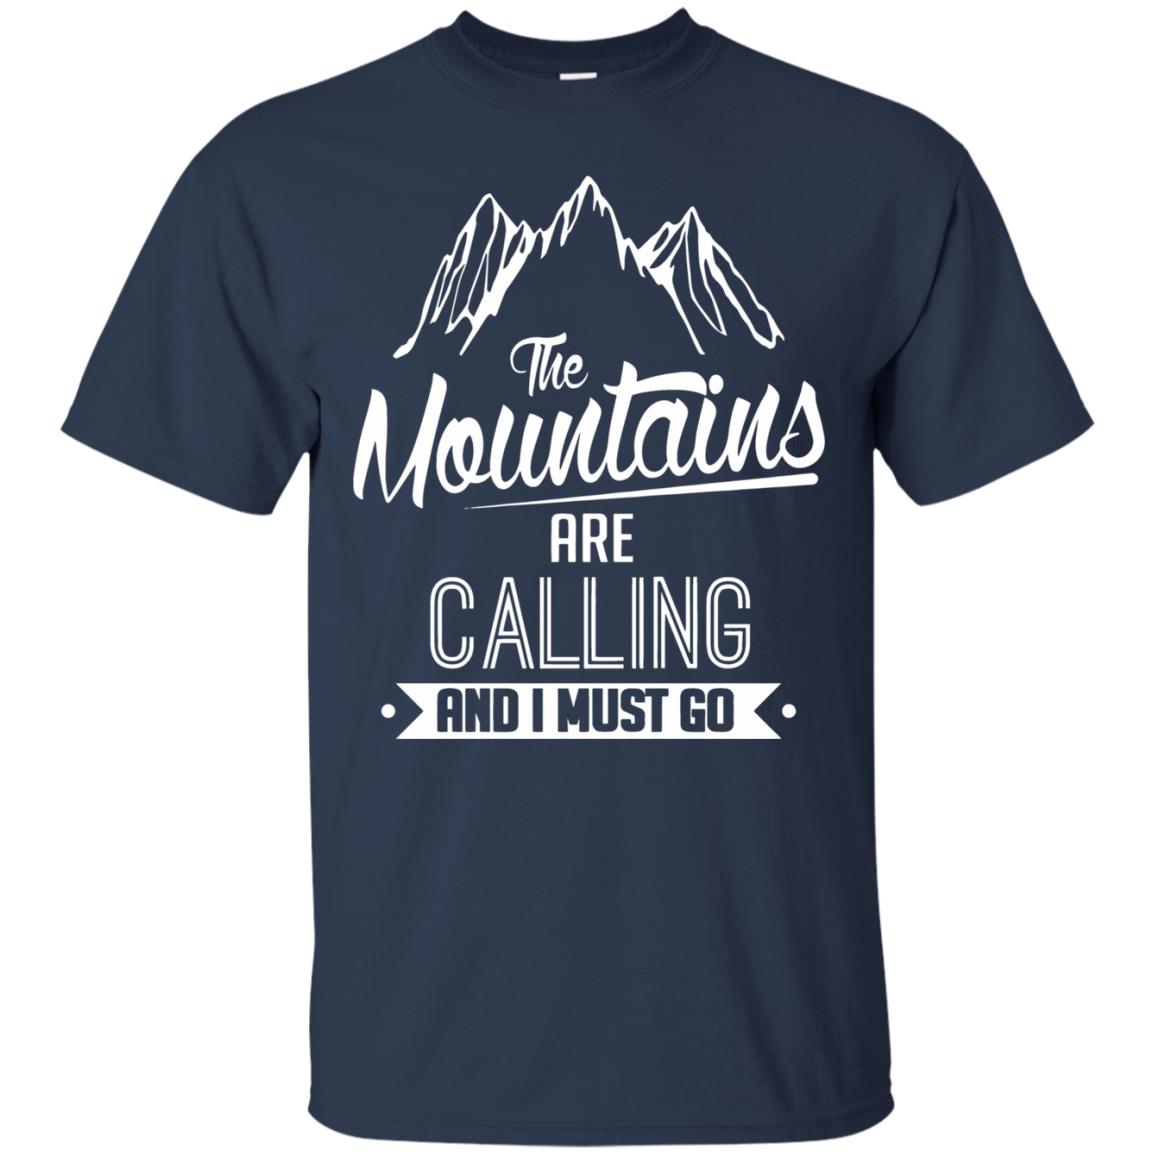 The Mountains Are Calling And I Must Go Shirt - 10% Off - FavorMerch